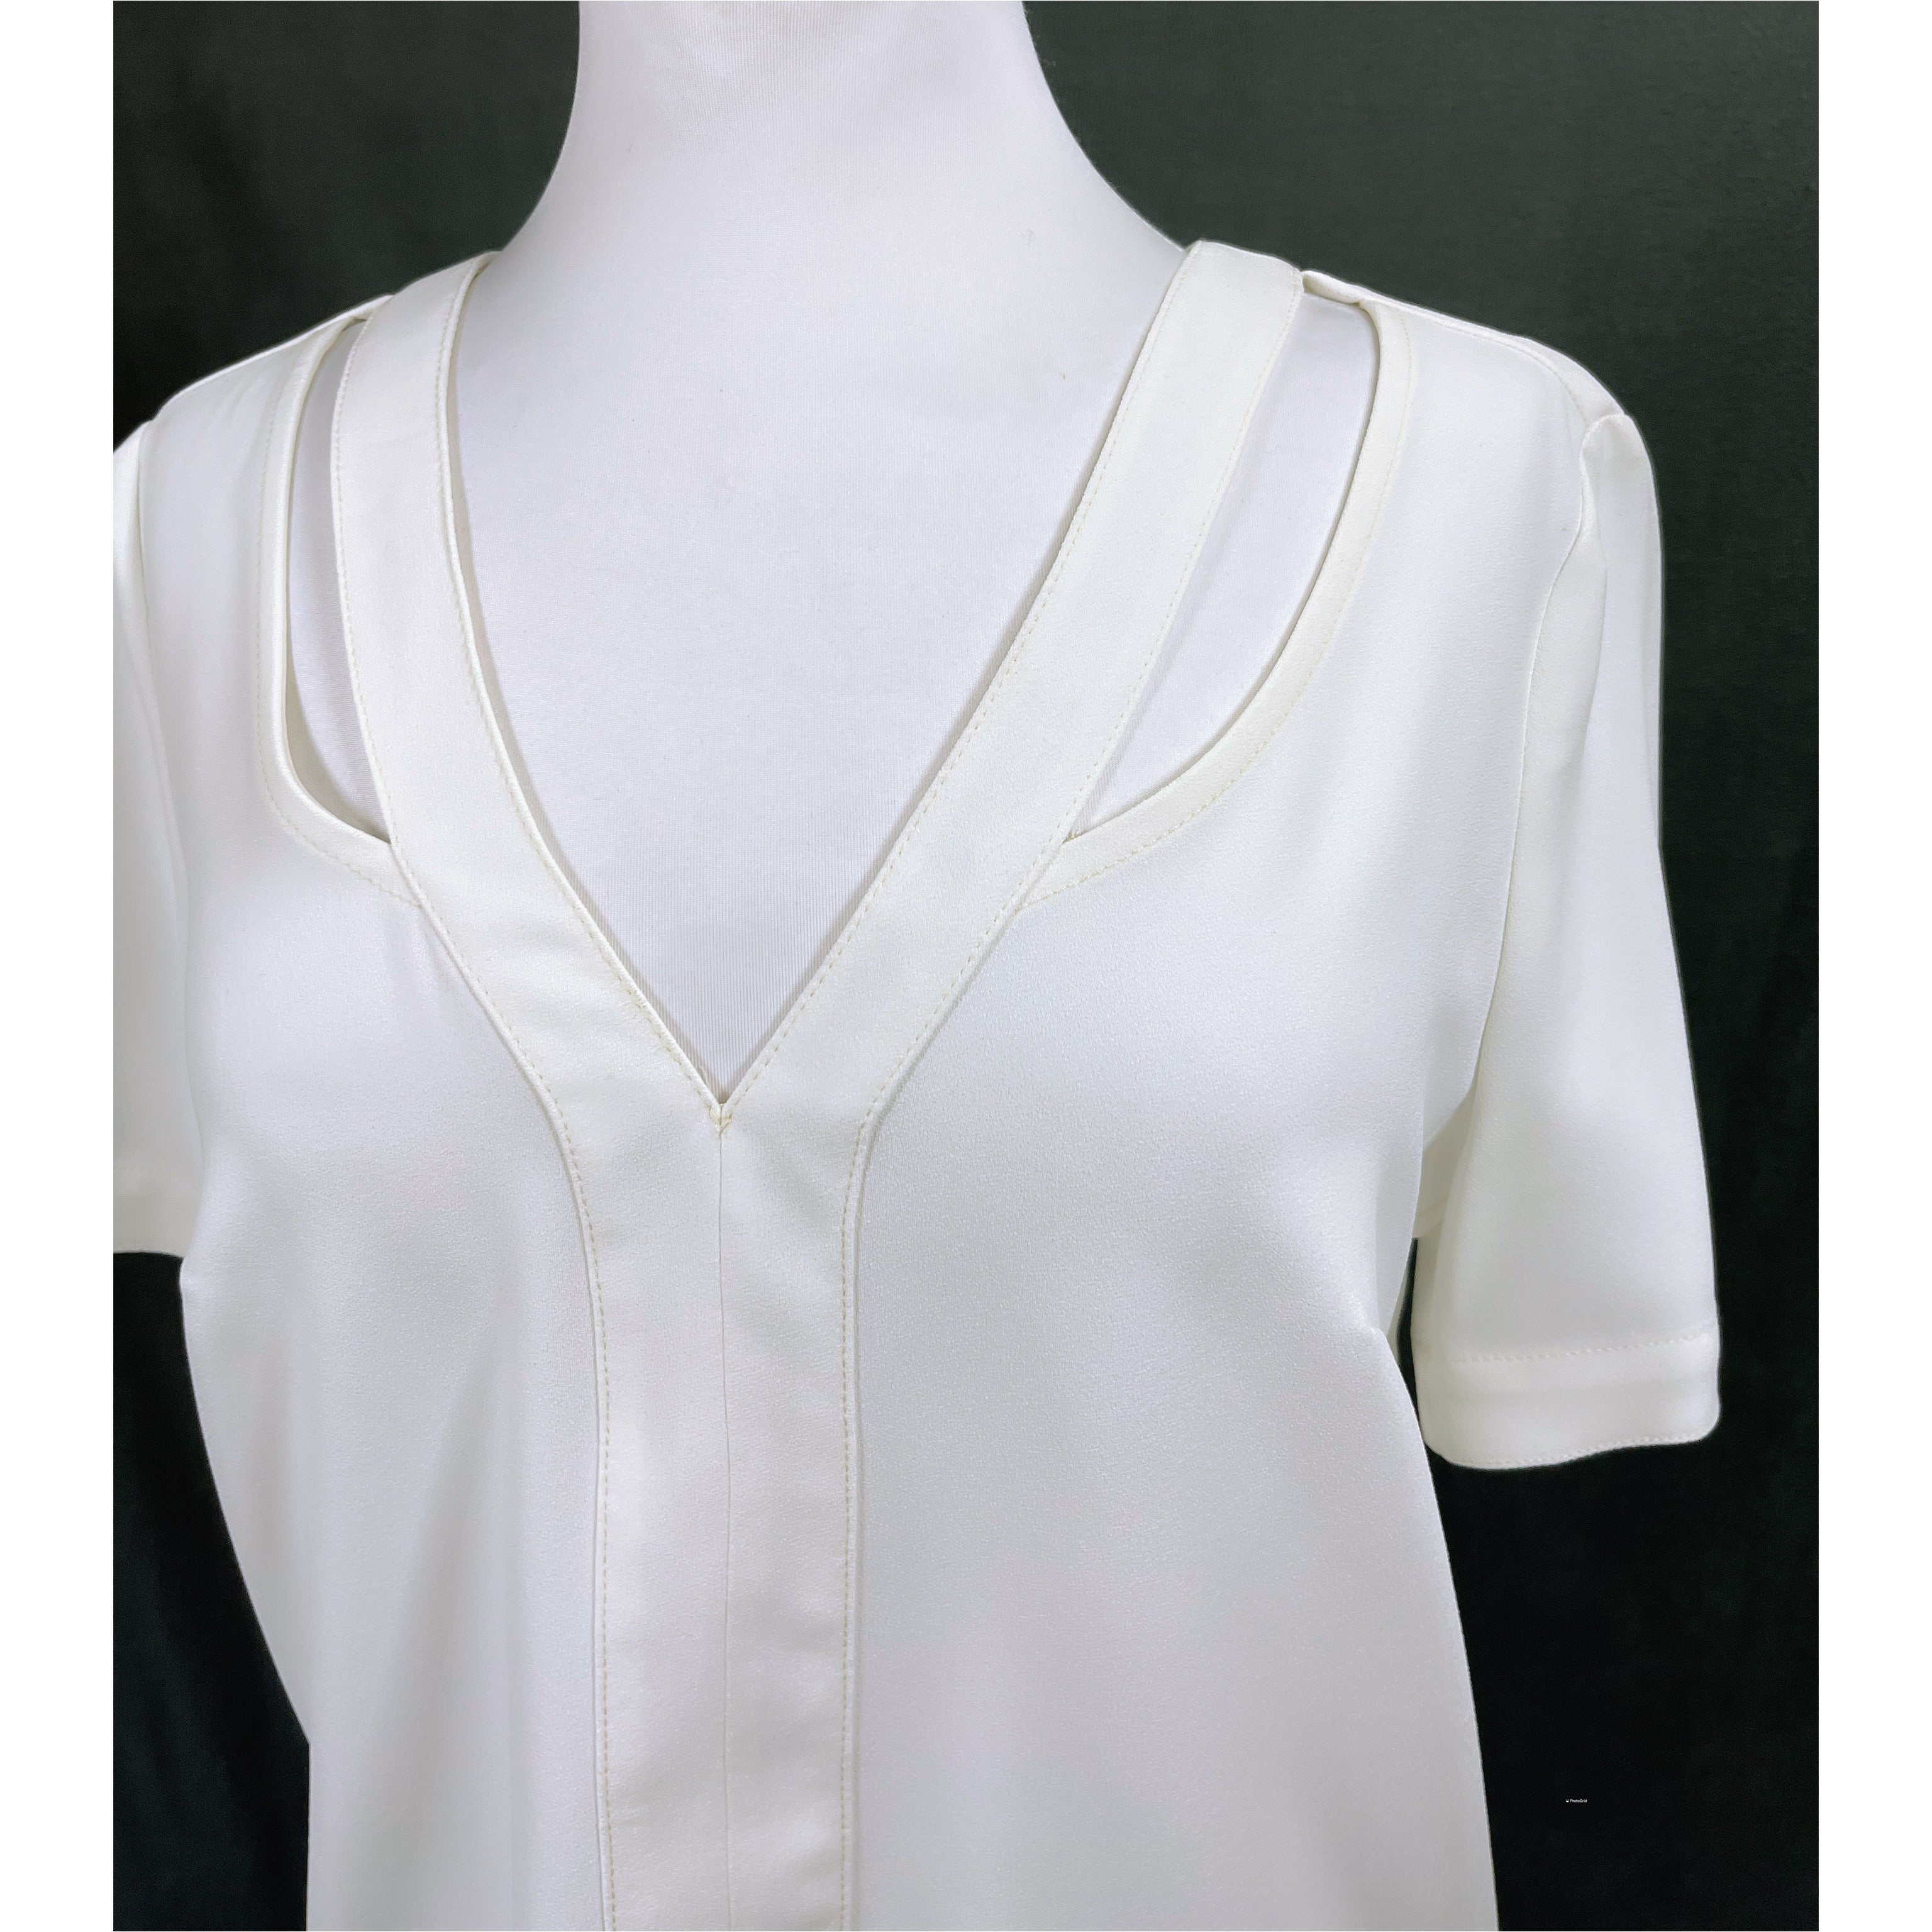 Trina Turk white blouse, size S, NEW WITH TAGS!